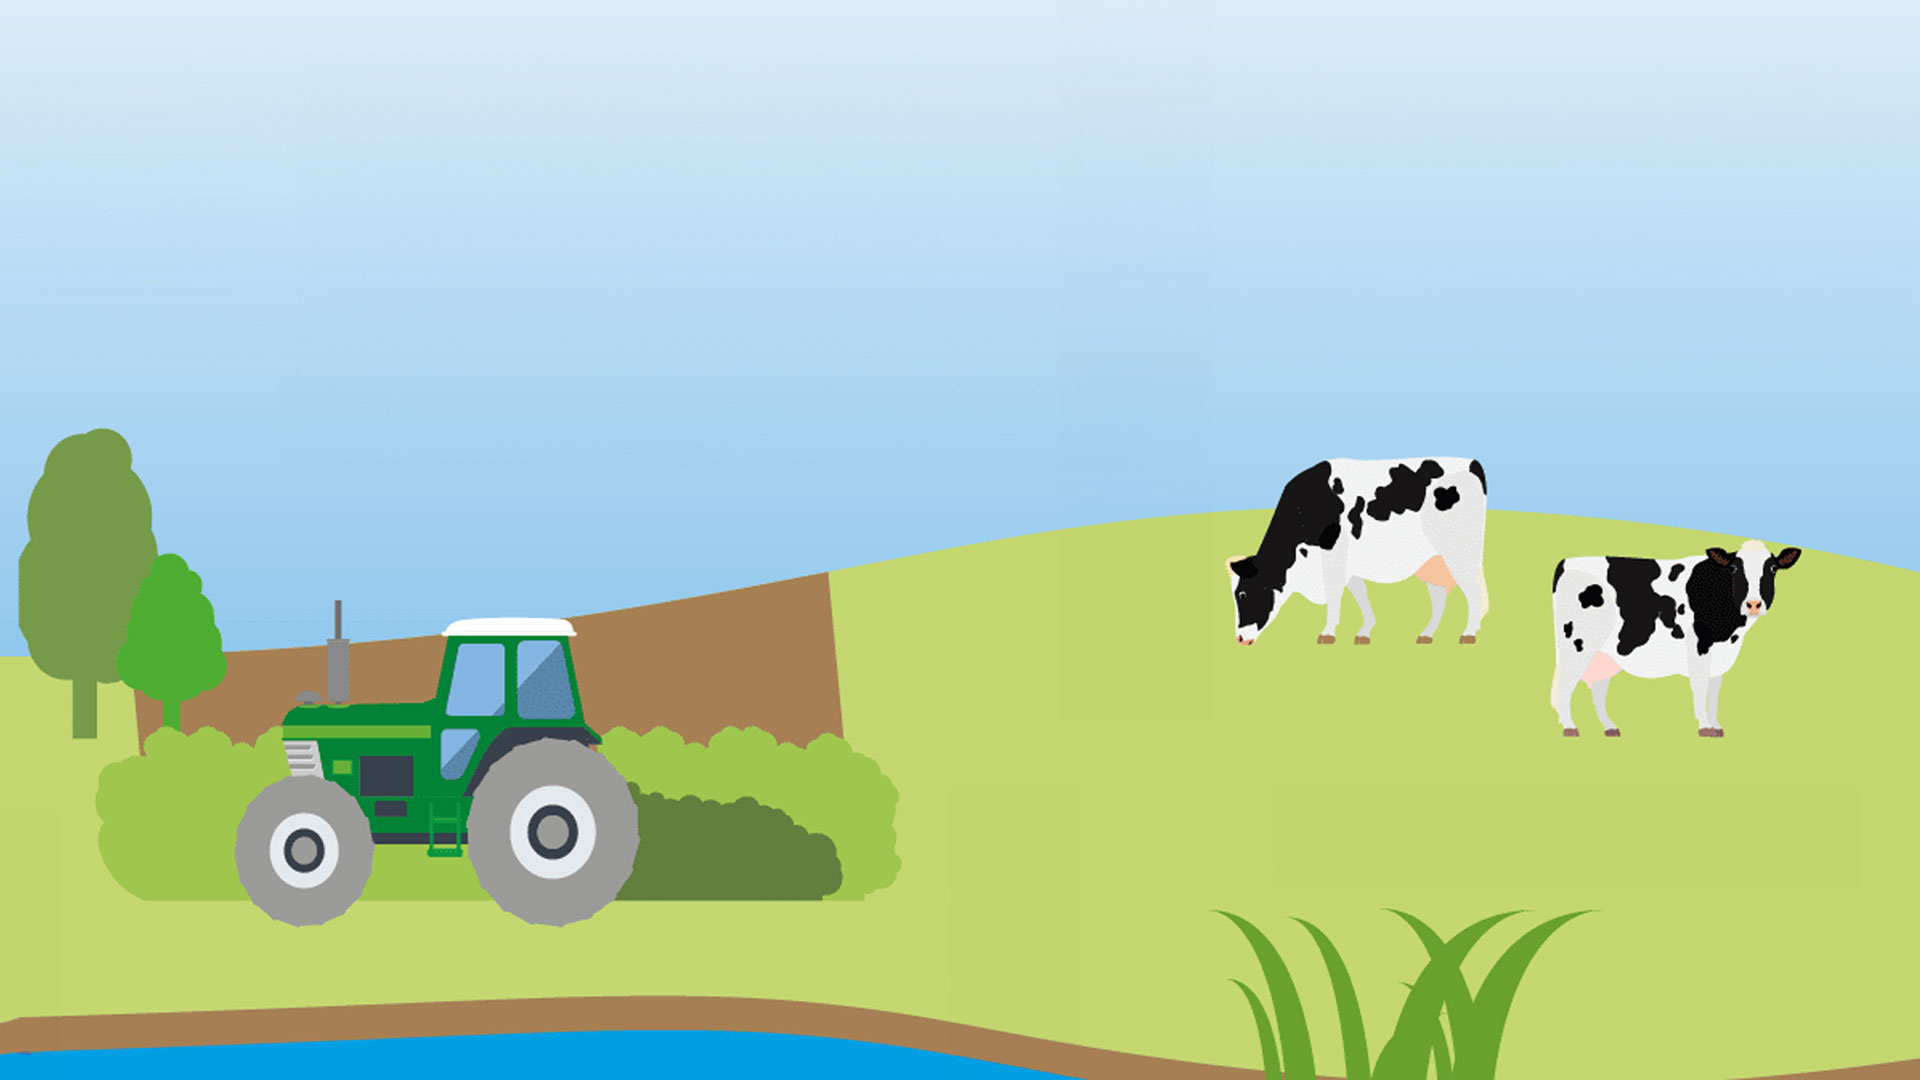 Illustration of a tractor and cows on a farm